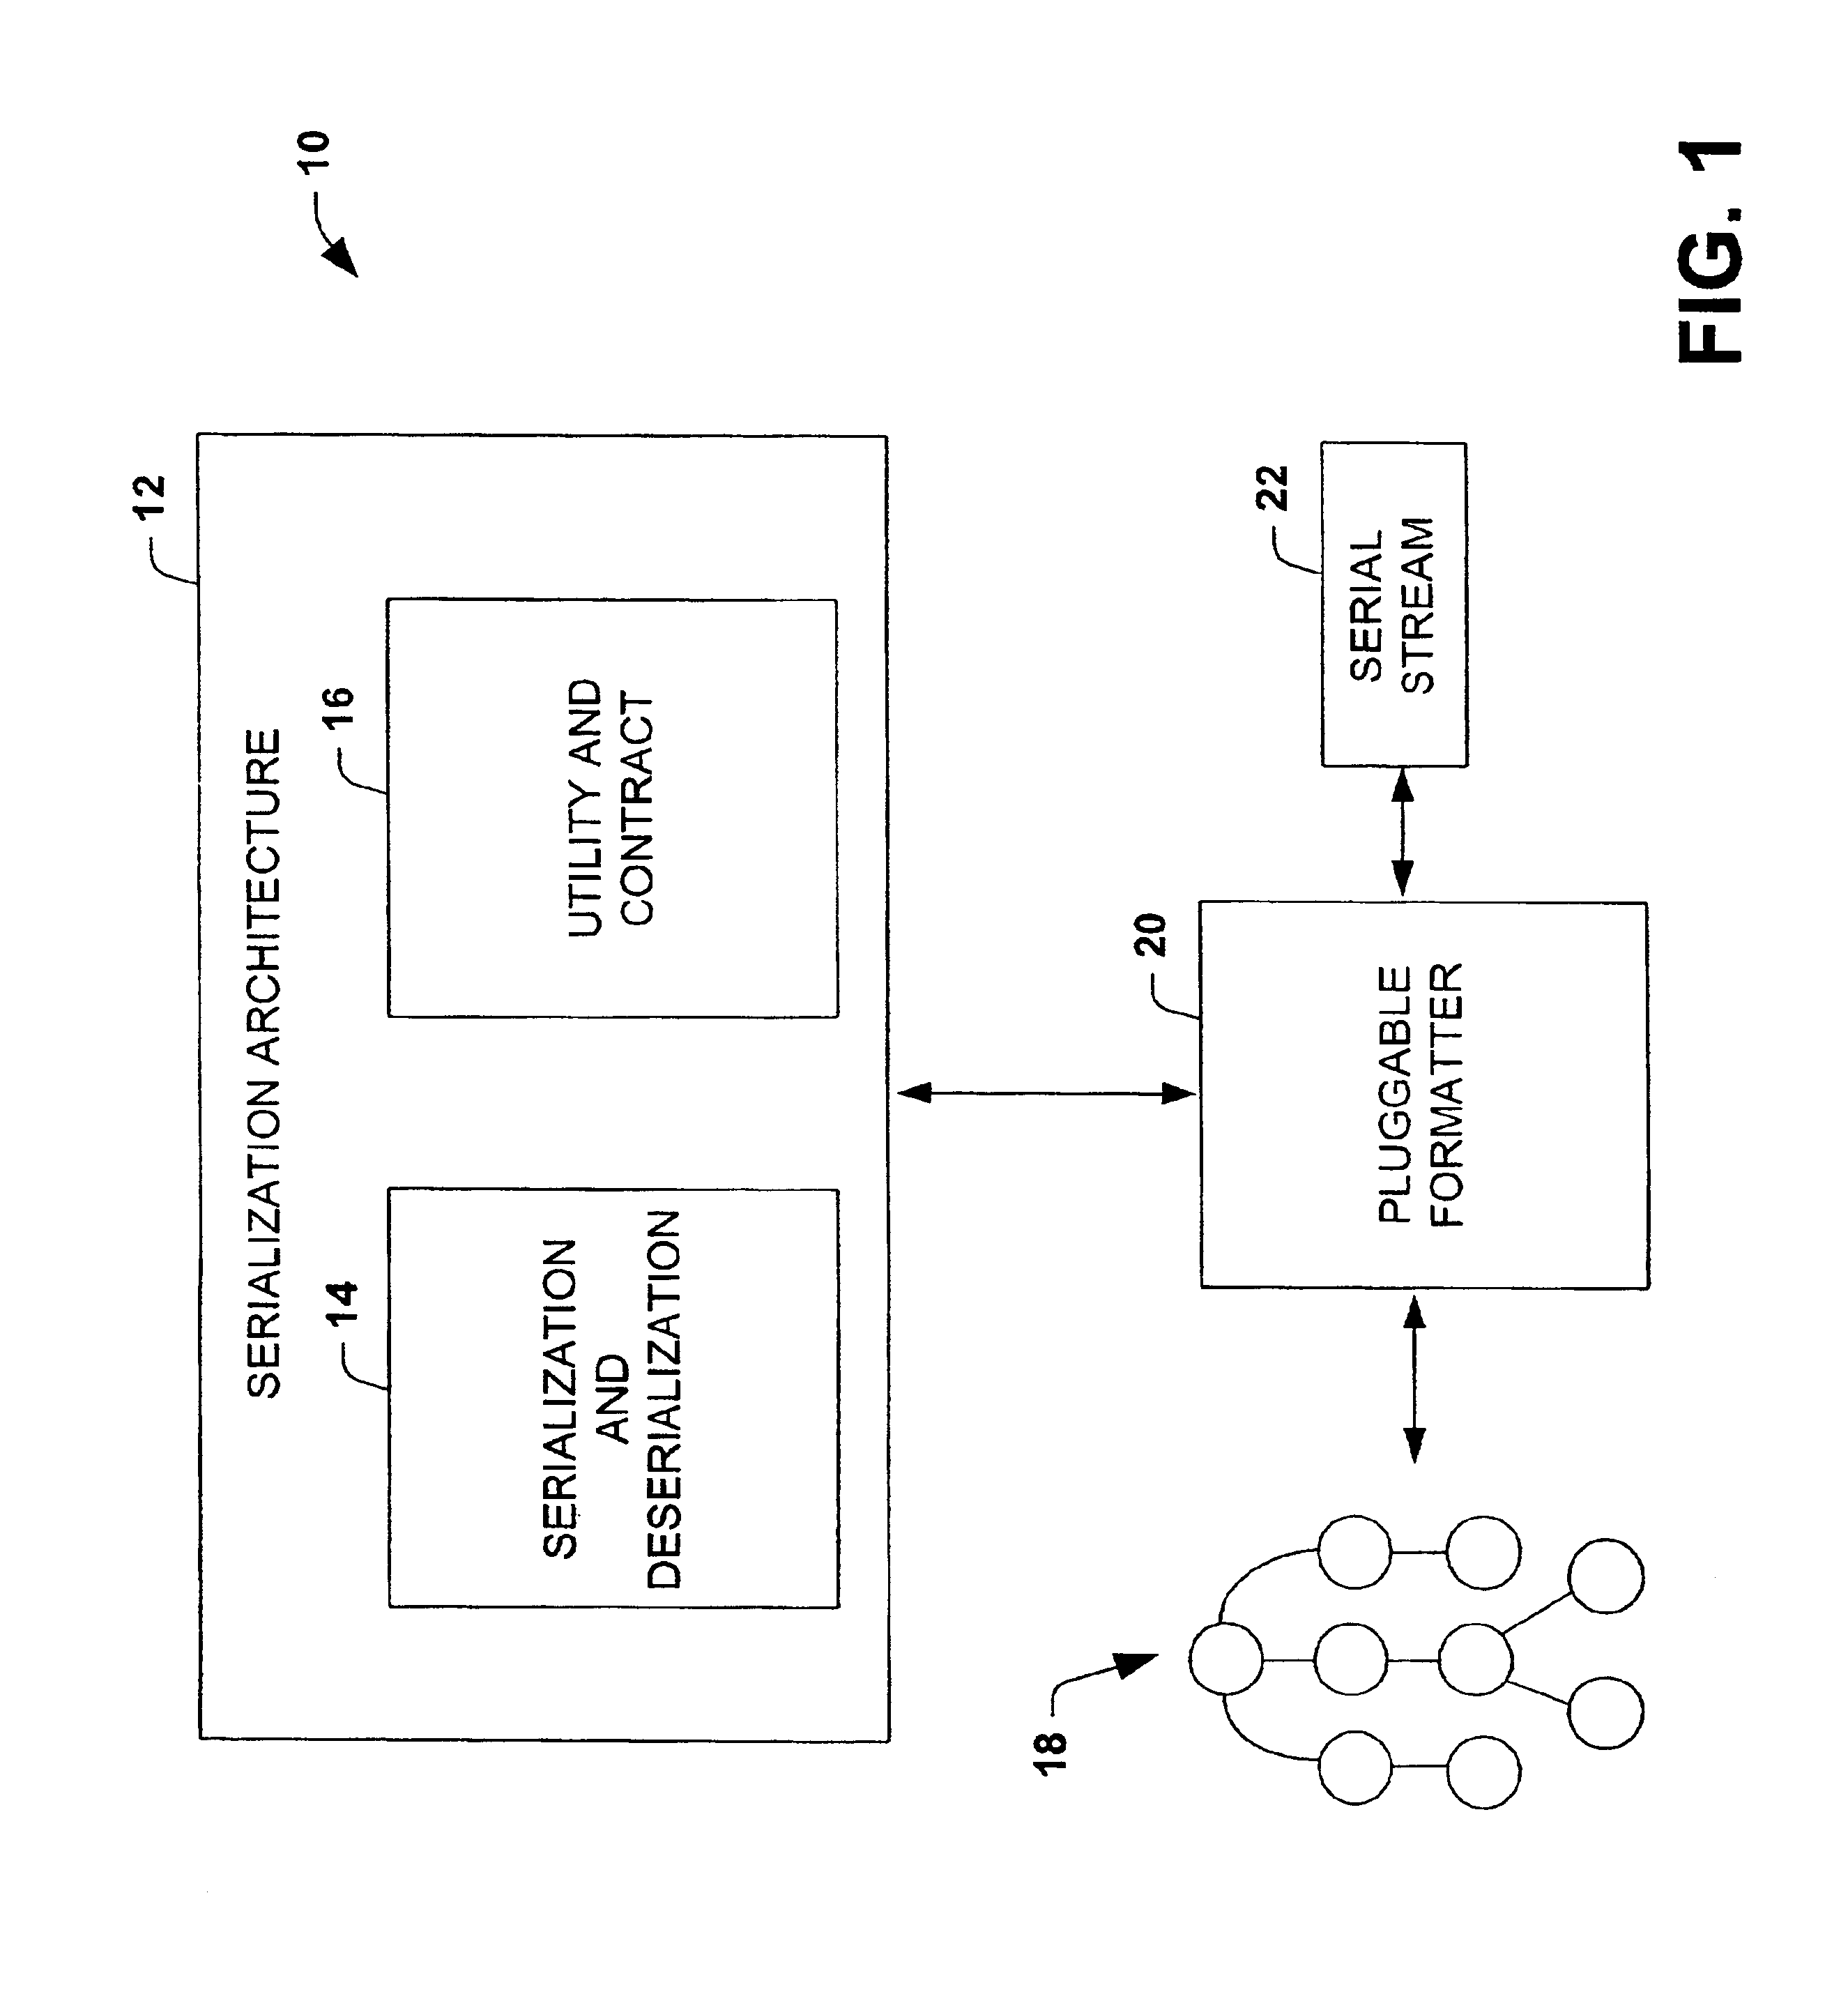 Architecture and method for serialization and deserialization of objects